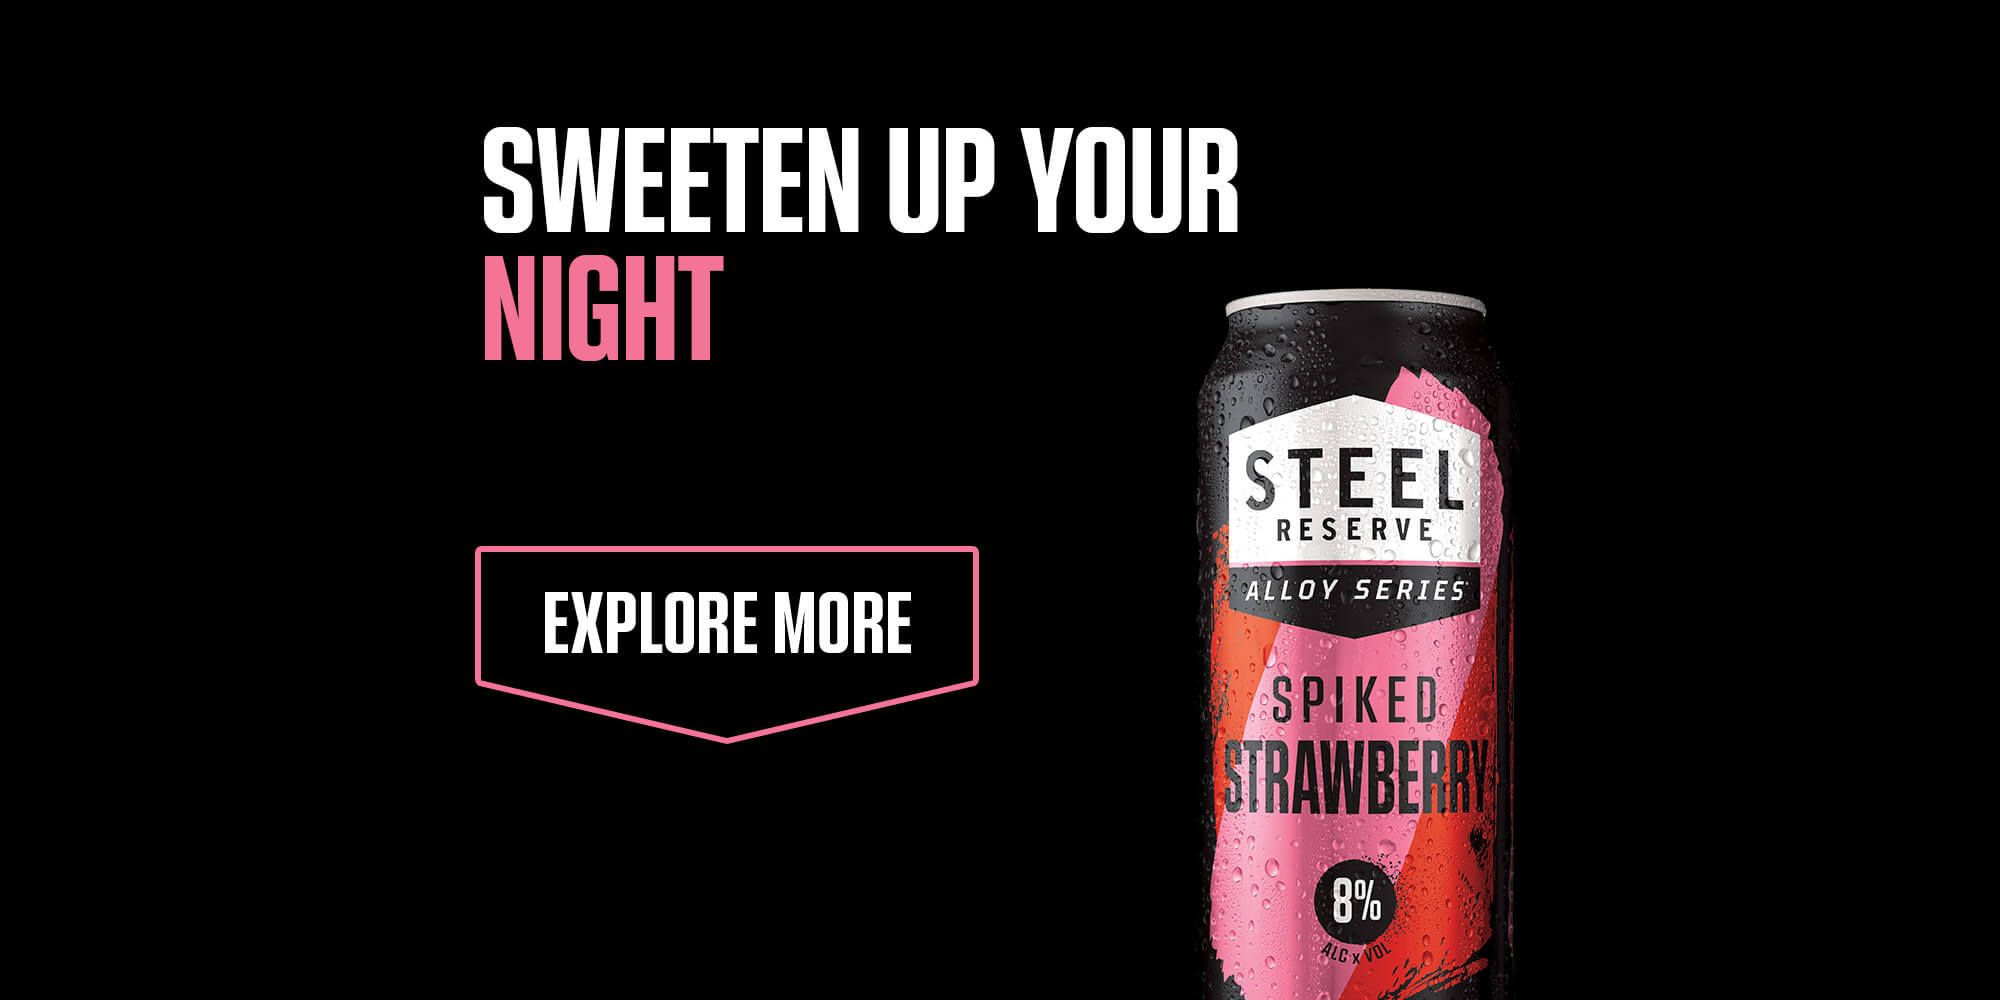 Spiked Strawberry Burst | Steel Reserve Alloy Series